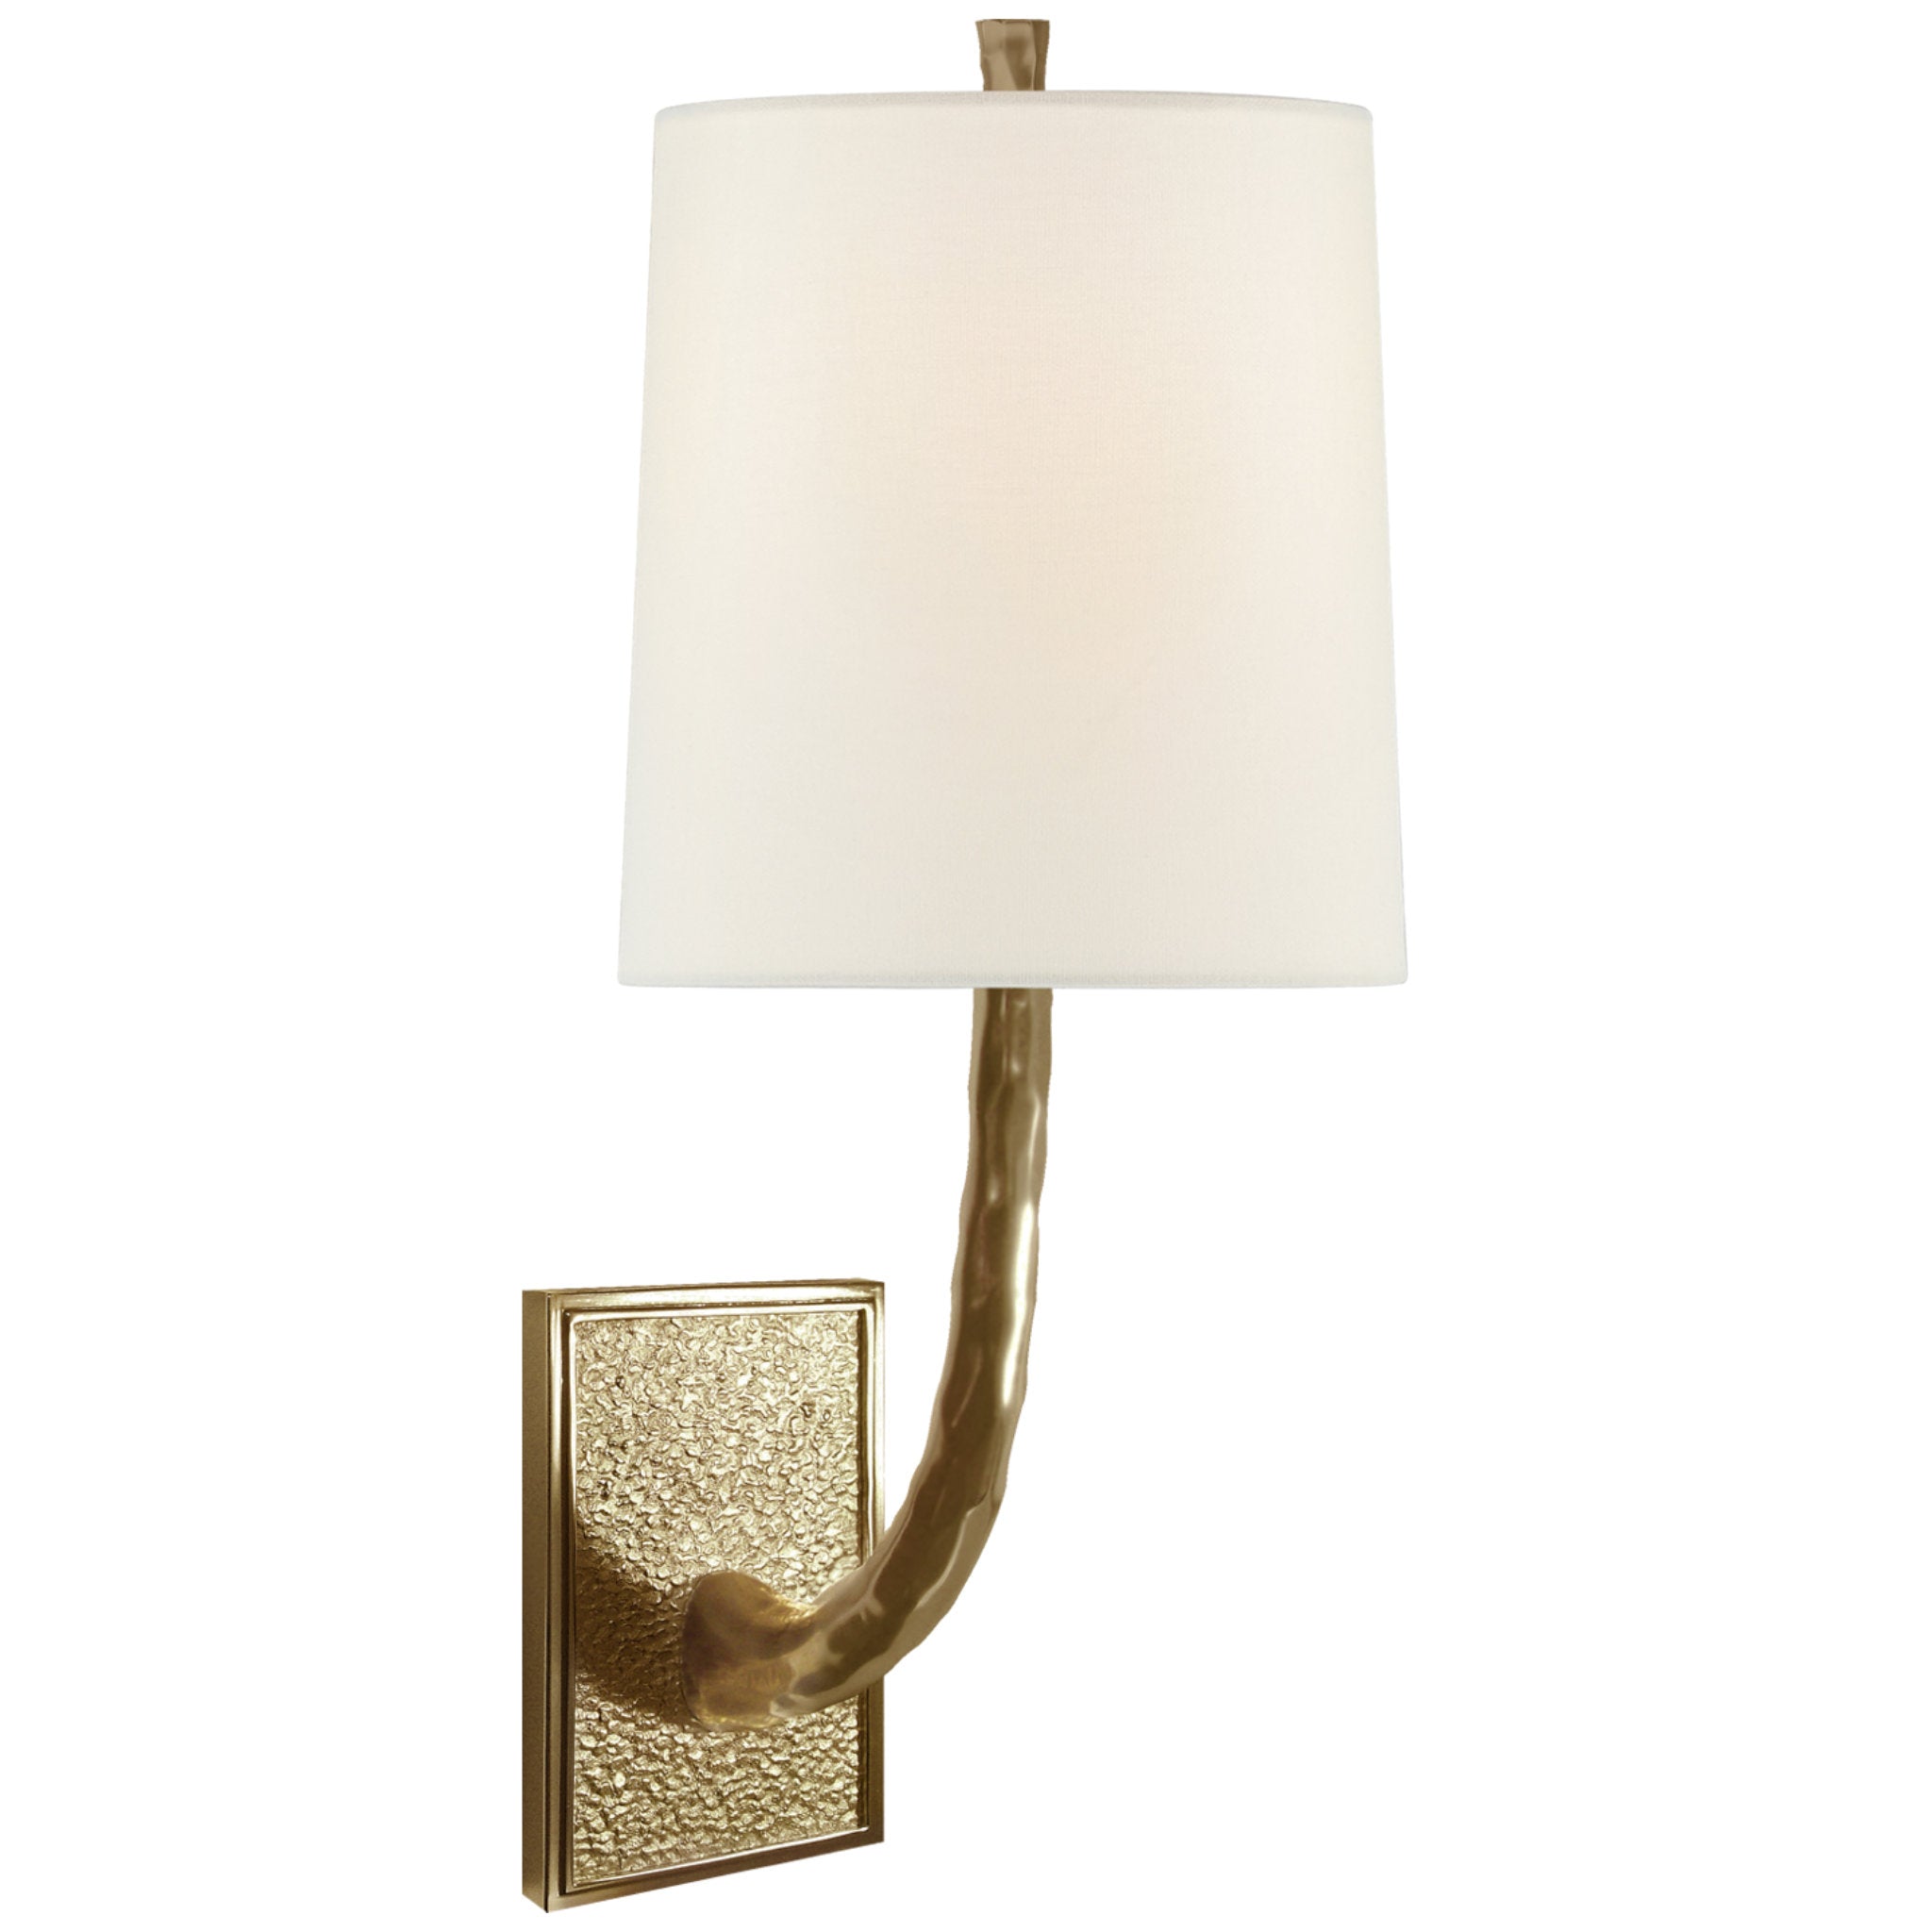 Barbara Barry Lyric Branch Sconce in Soft Brass with Linen Shade